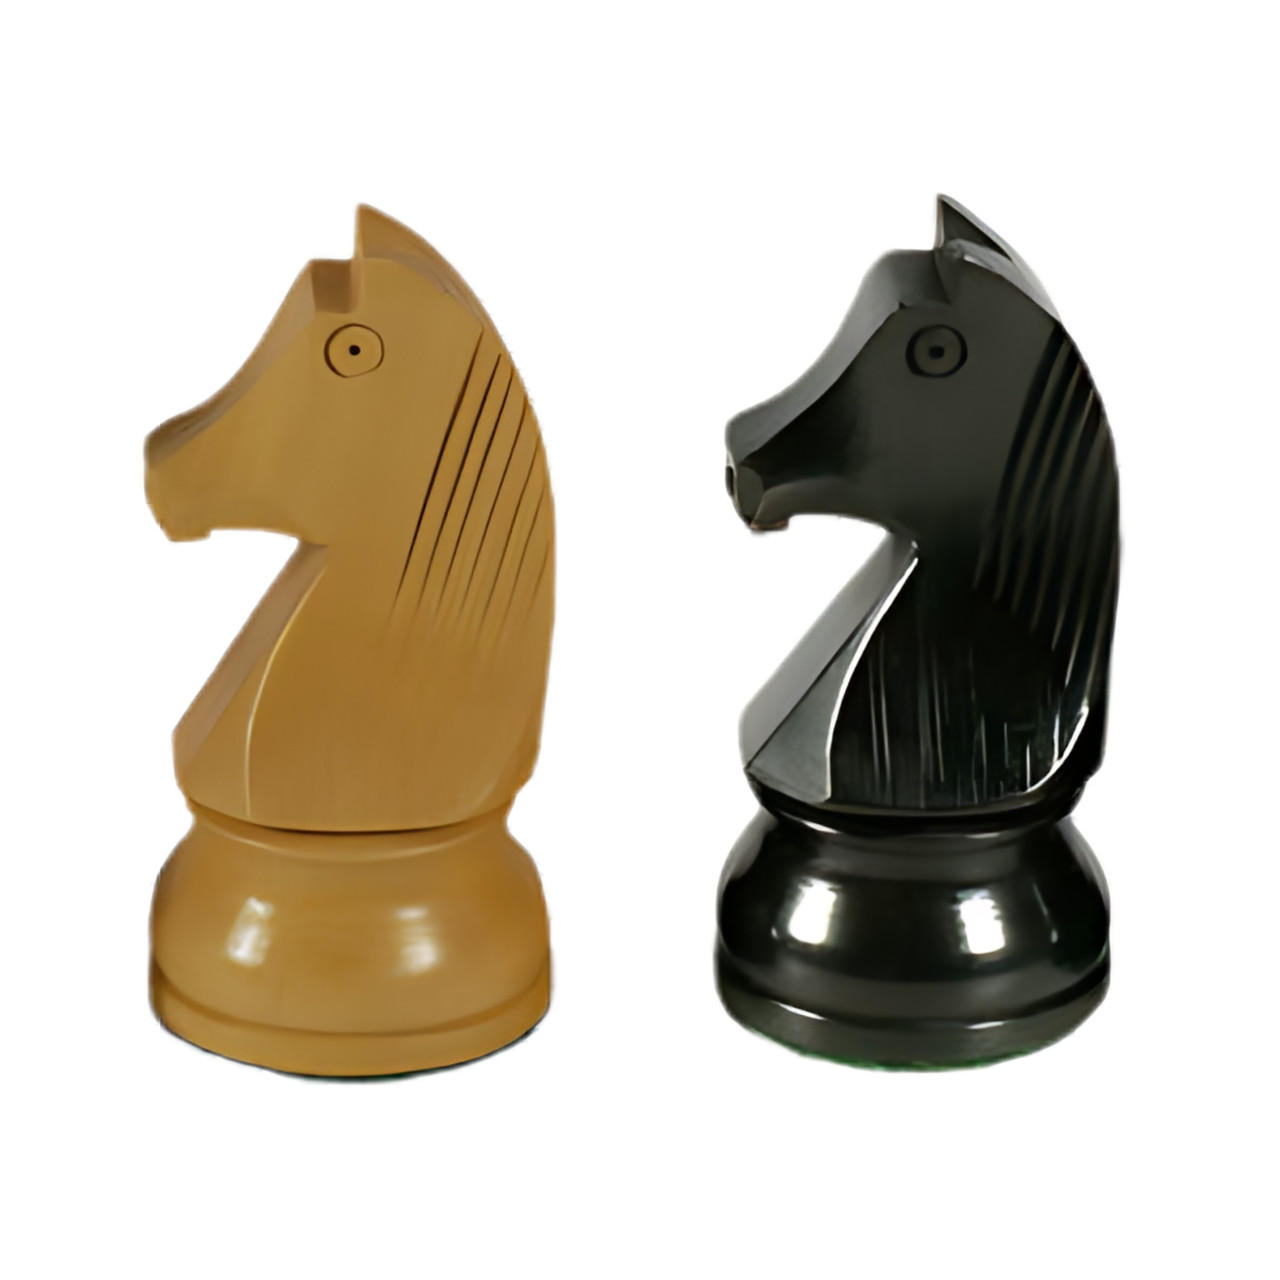 The Zeppelin - Boxwood German Knight Chess Pieces 3.75" King black and white knights